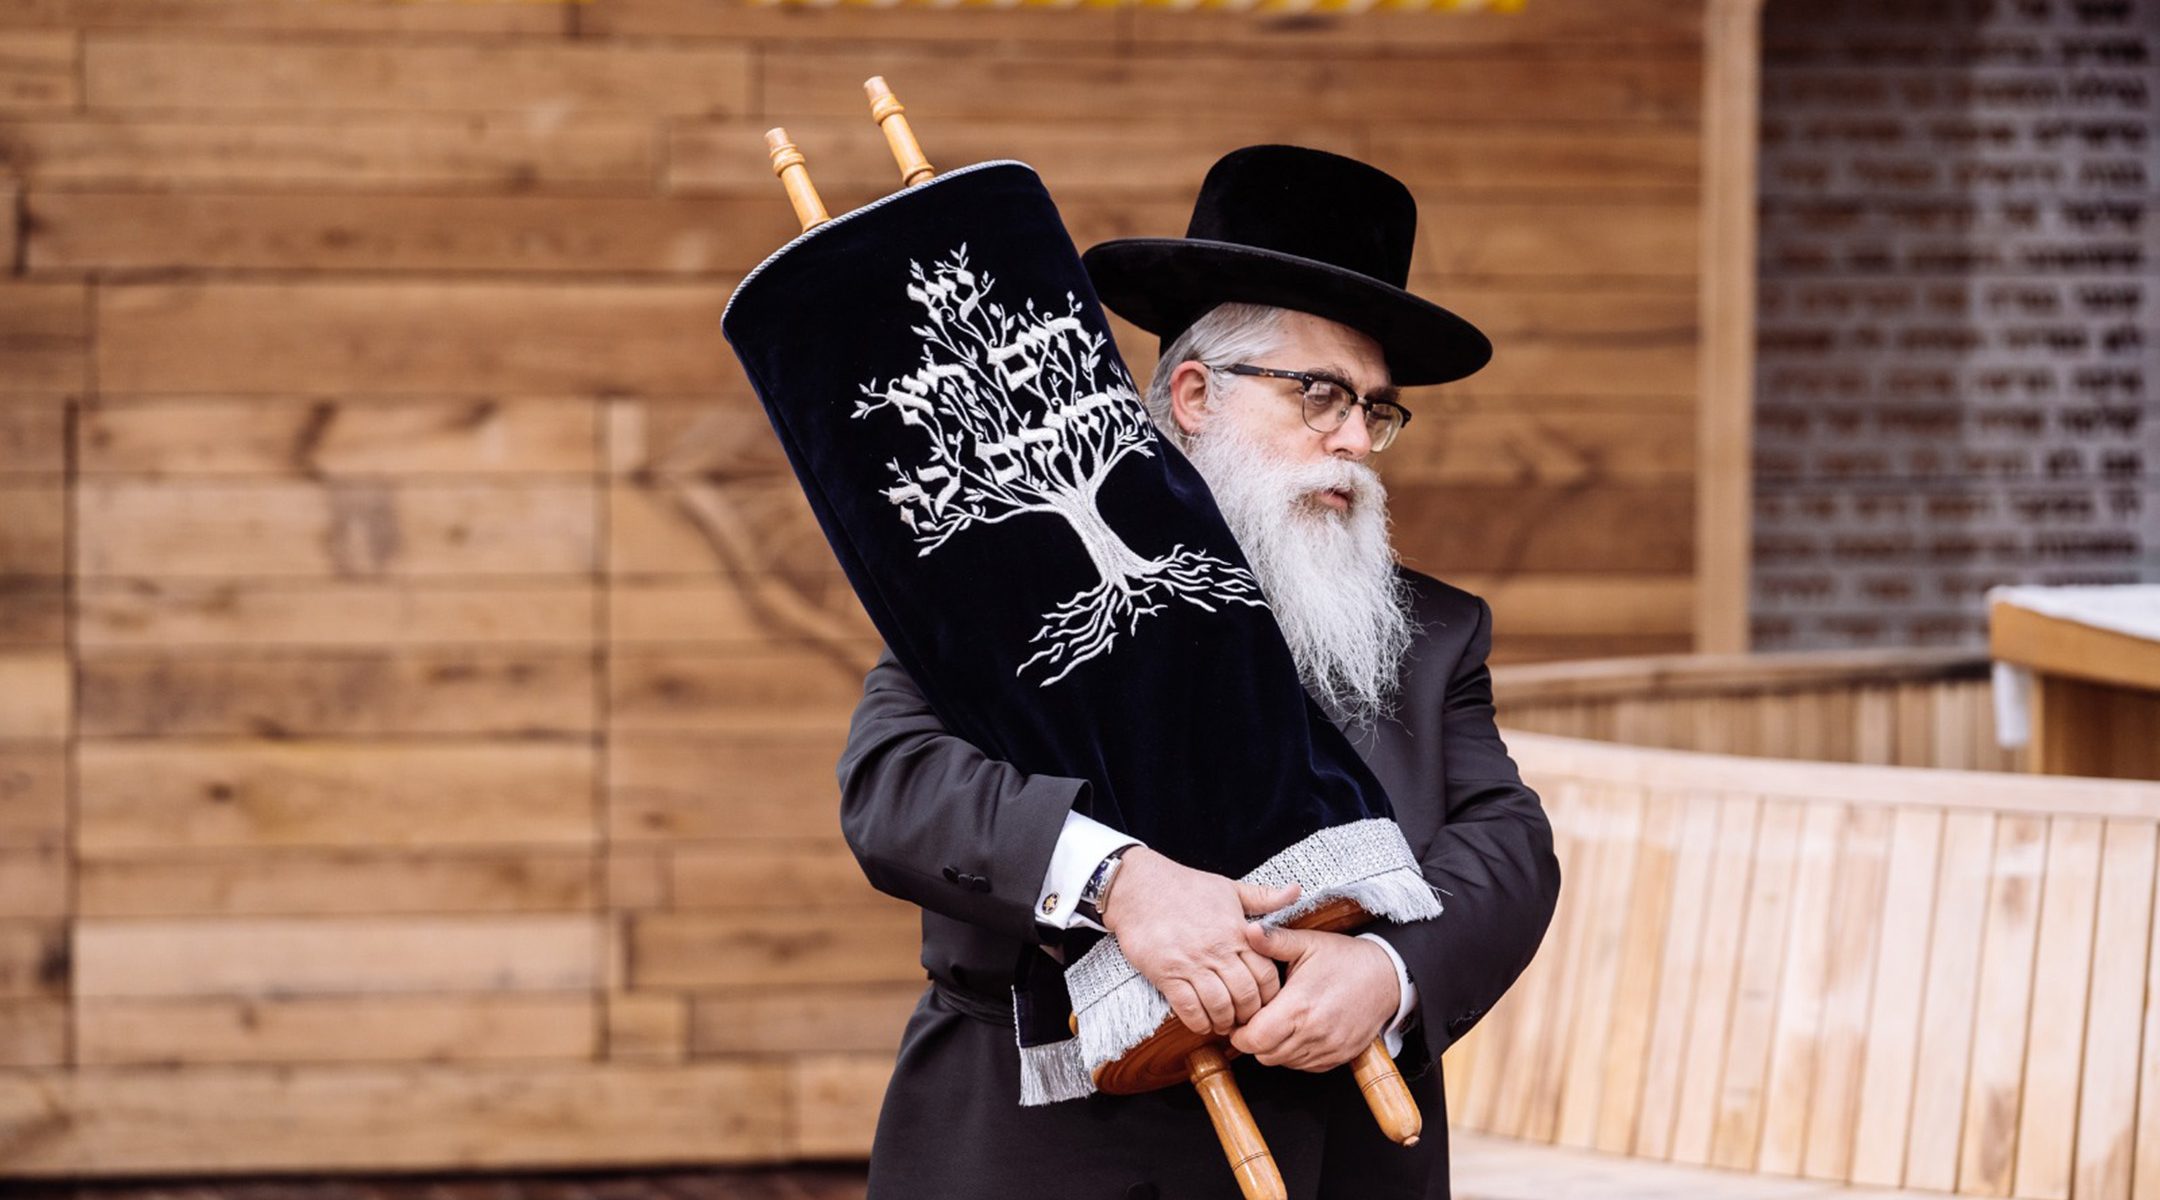 Ukrainian Chief Rabbi Ya’akov Dov Bleich holds a Torah scroll during the opening ceremony in Kyiv, Ukraine on April 7, 2021 of a synagogue on the site of the Babi Yar 1941 massacre of Jews. (Babyn Yar Holocaust Memorial Center)